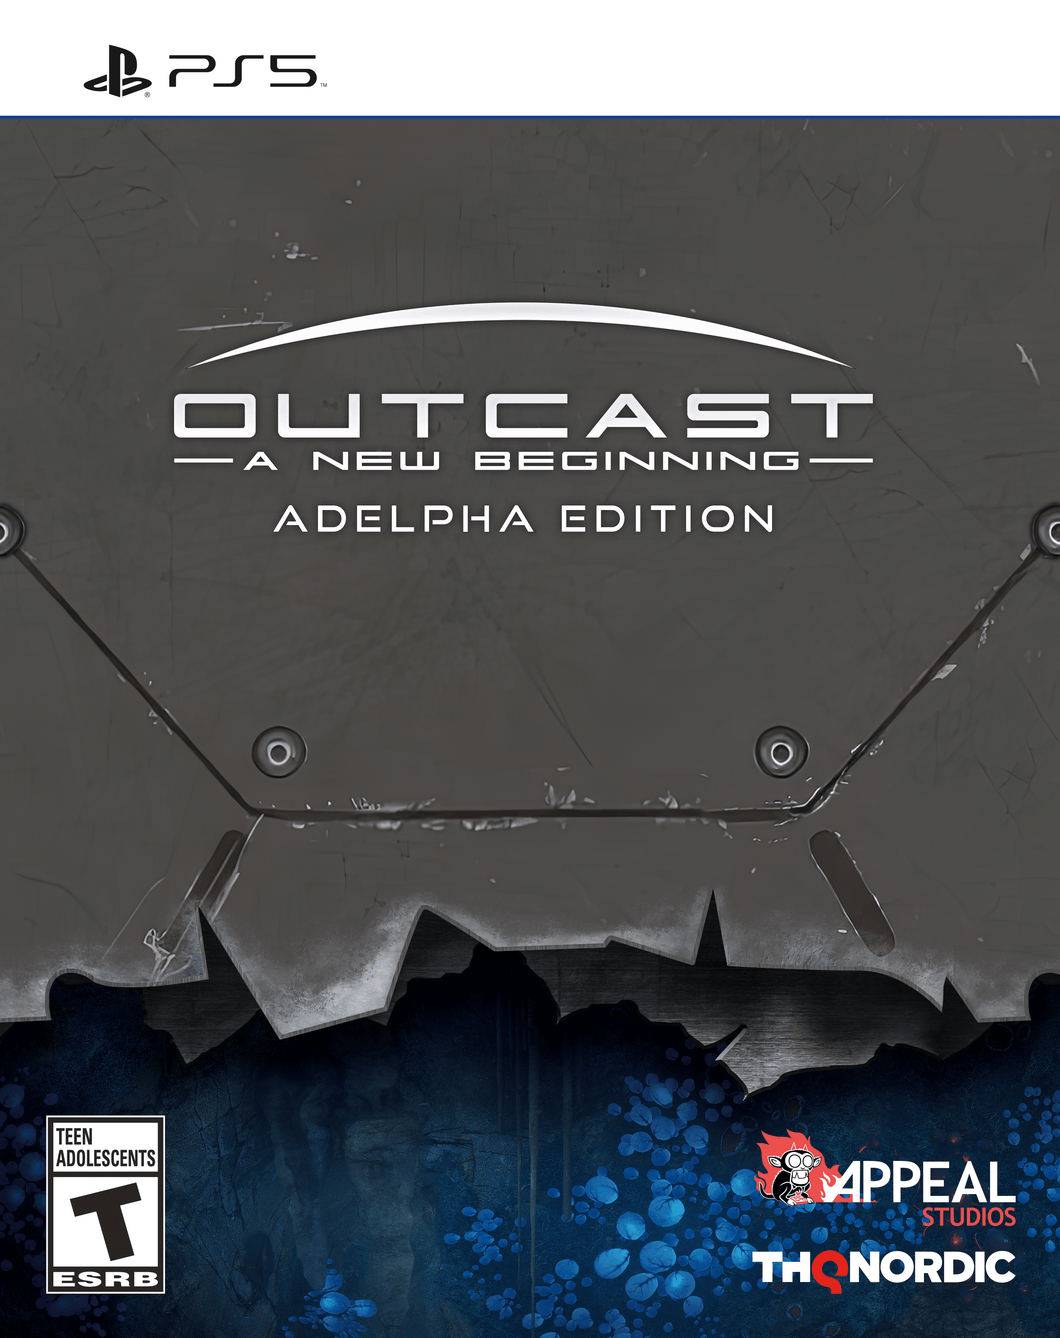 Outcast - A New Beginning - Adelpha Edition